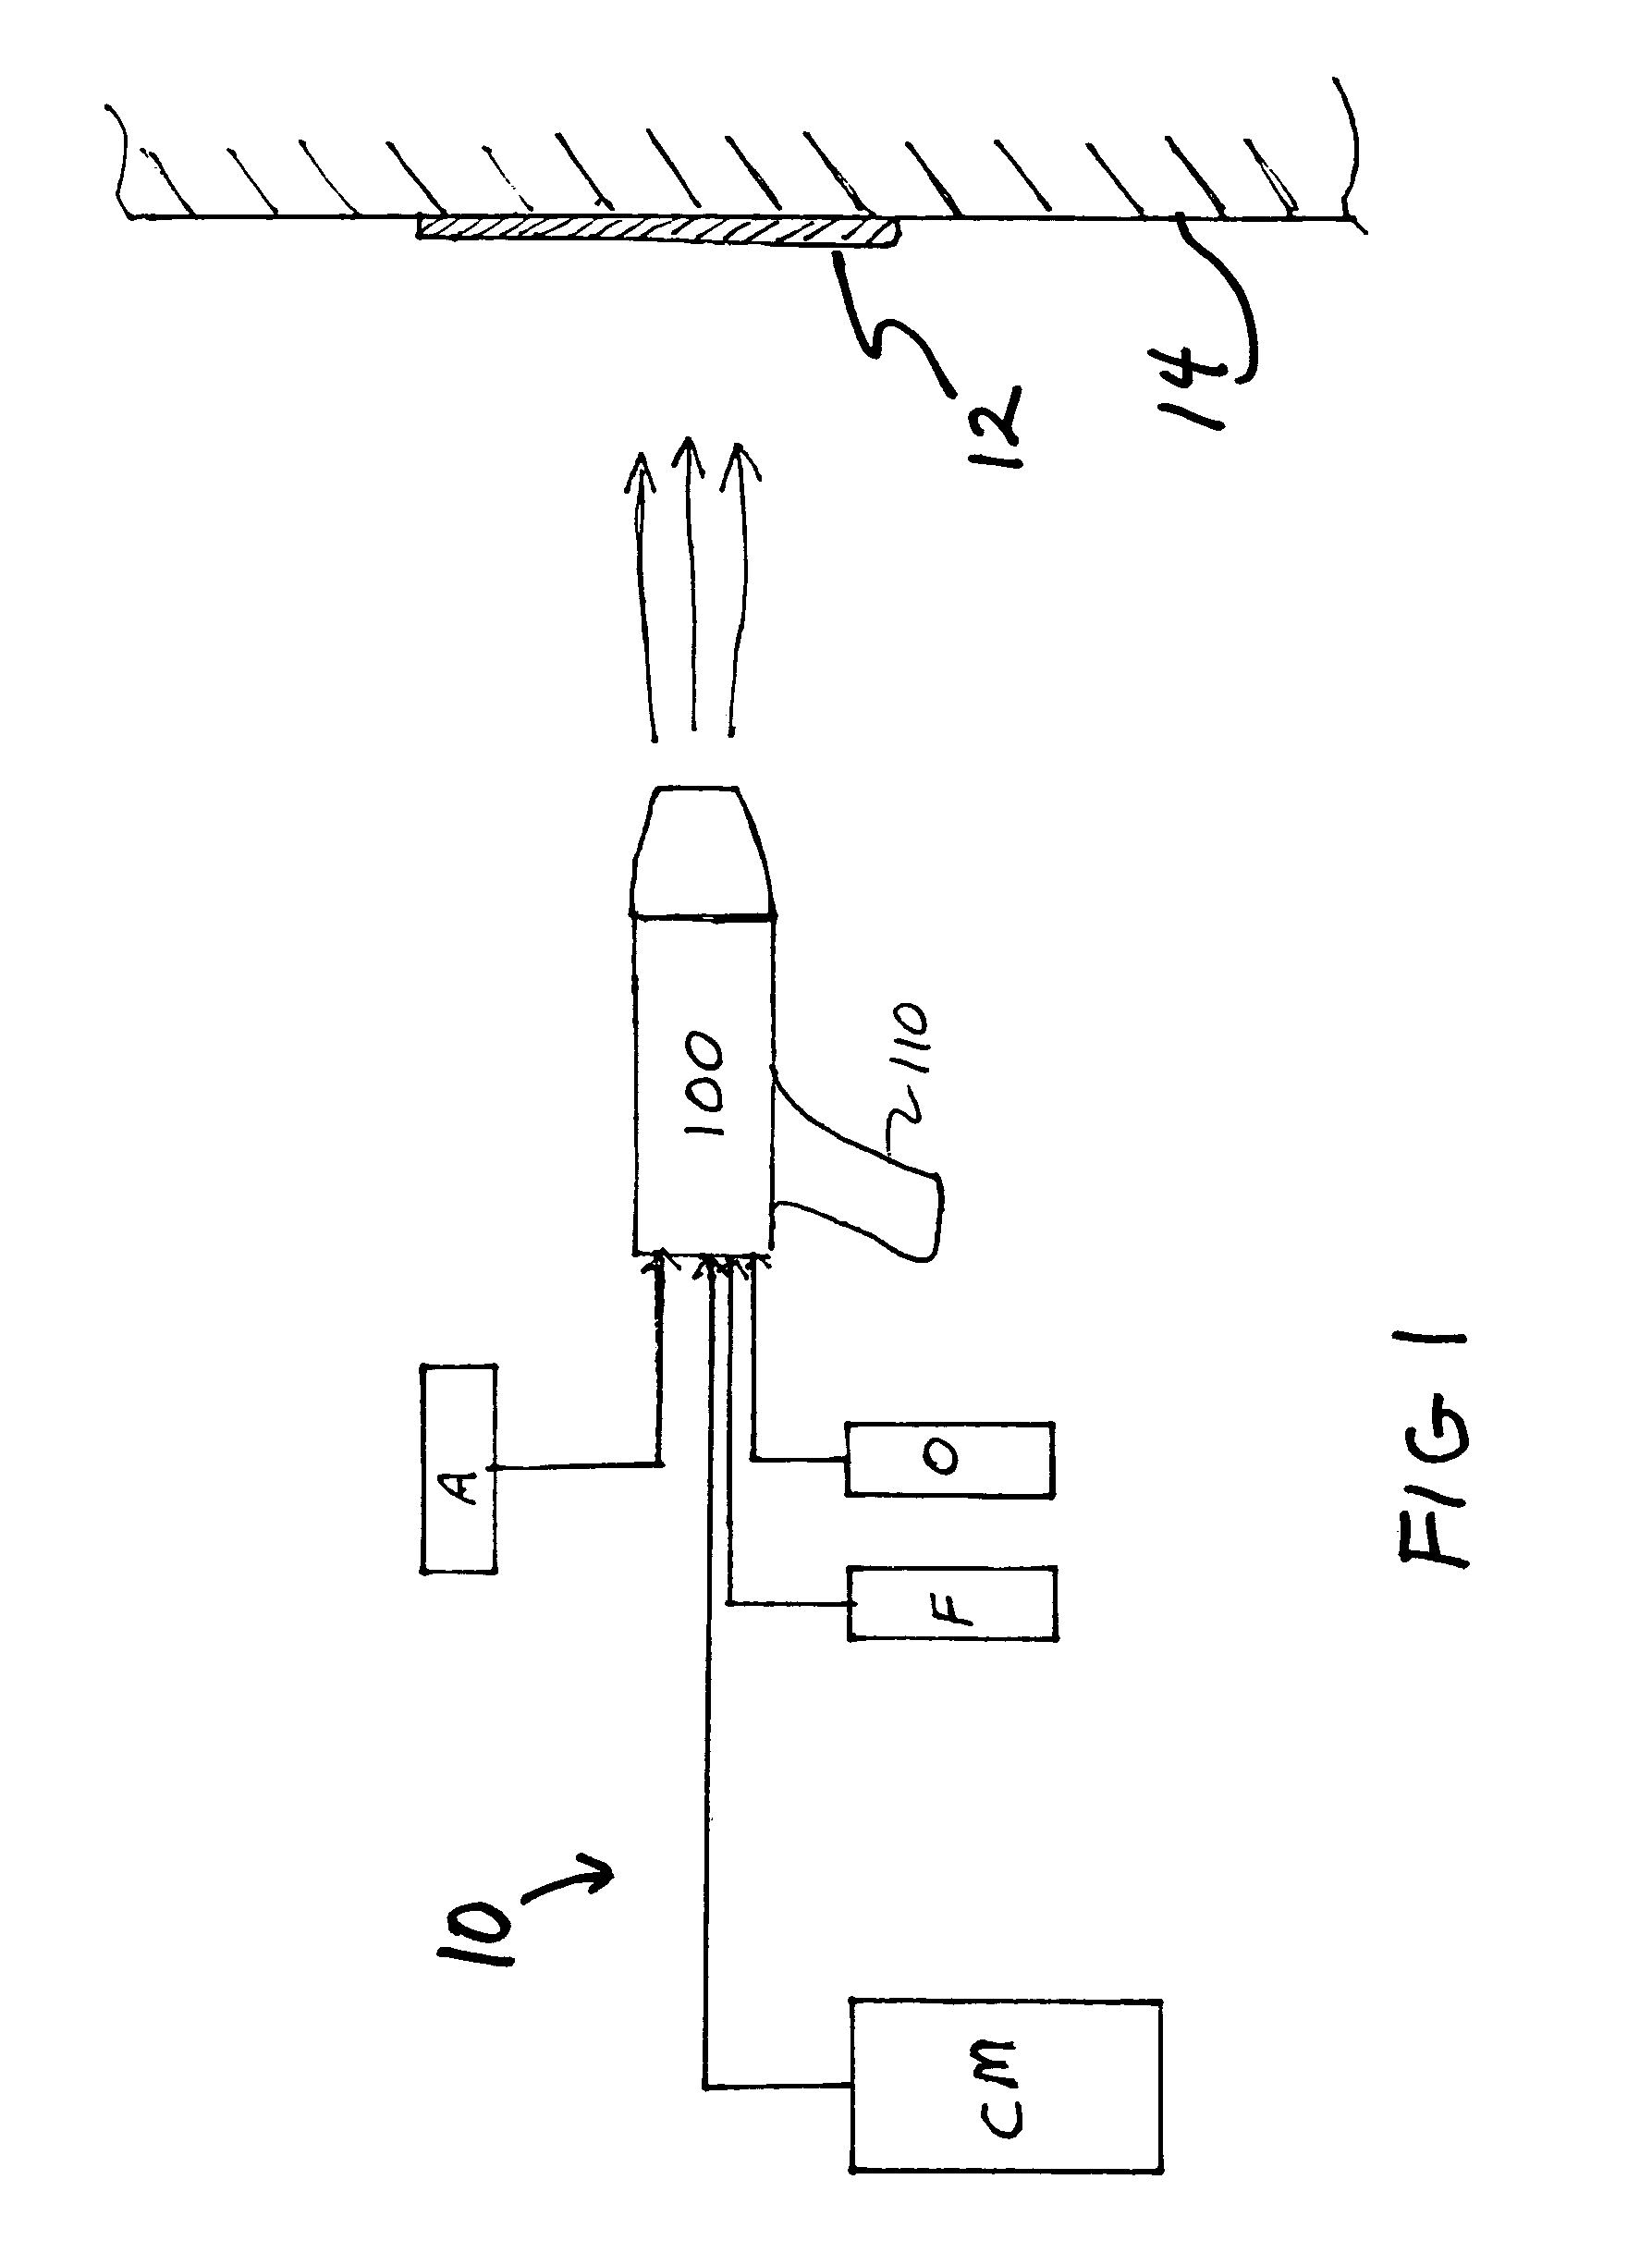 Apparatus for thermal spray coating